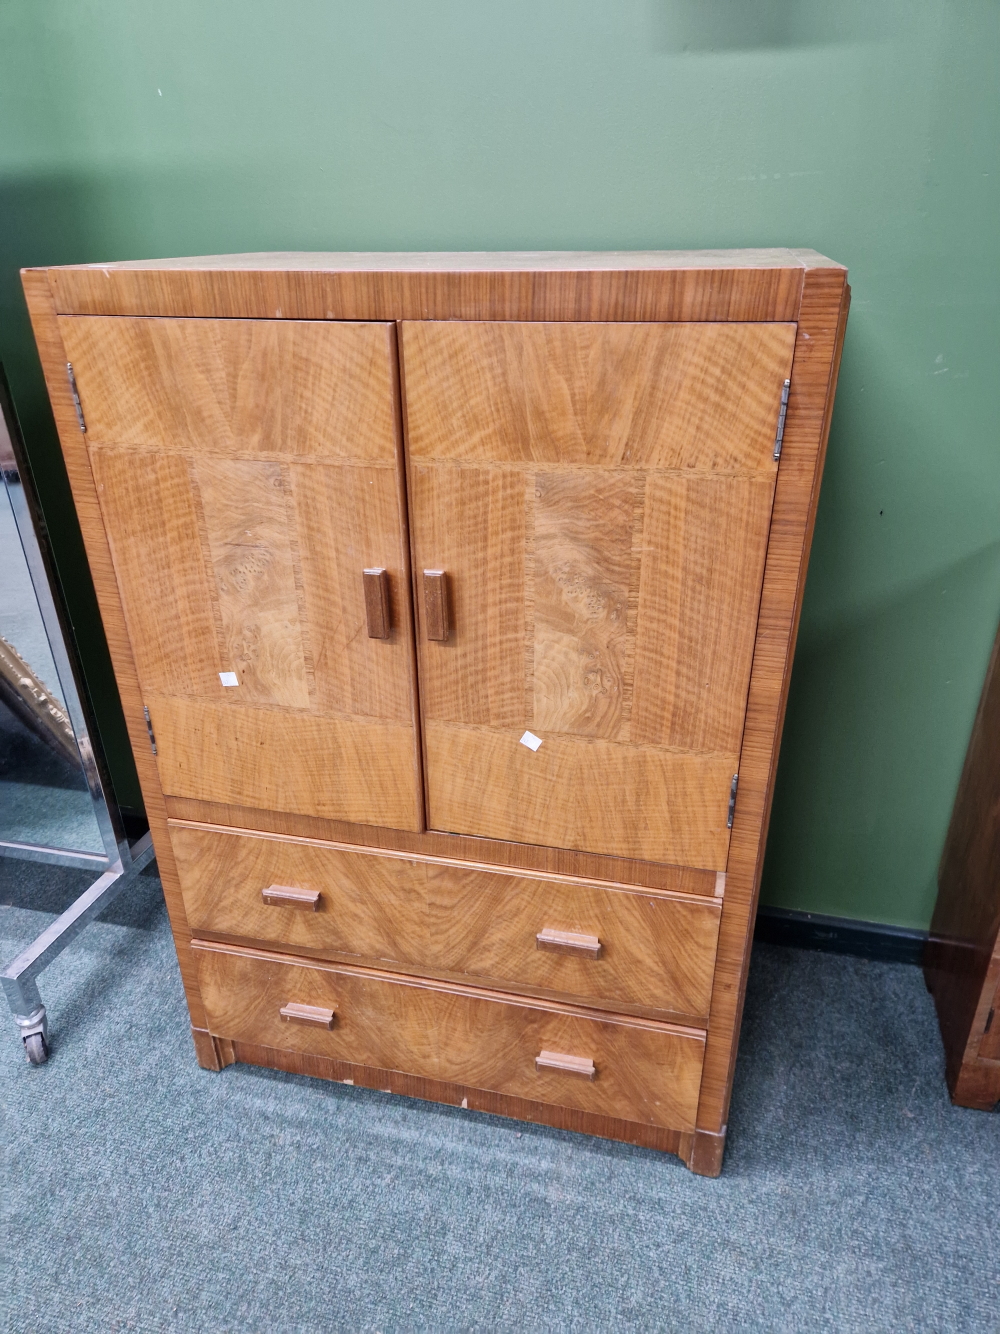 AN ART DECO WALNUT CORNER DRESSING TABLE AND STOOL TOGETHER WITH A TALLBOY CABINET - Image 2 of 31